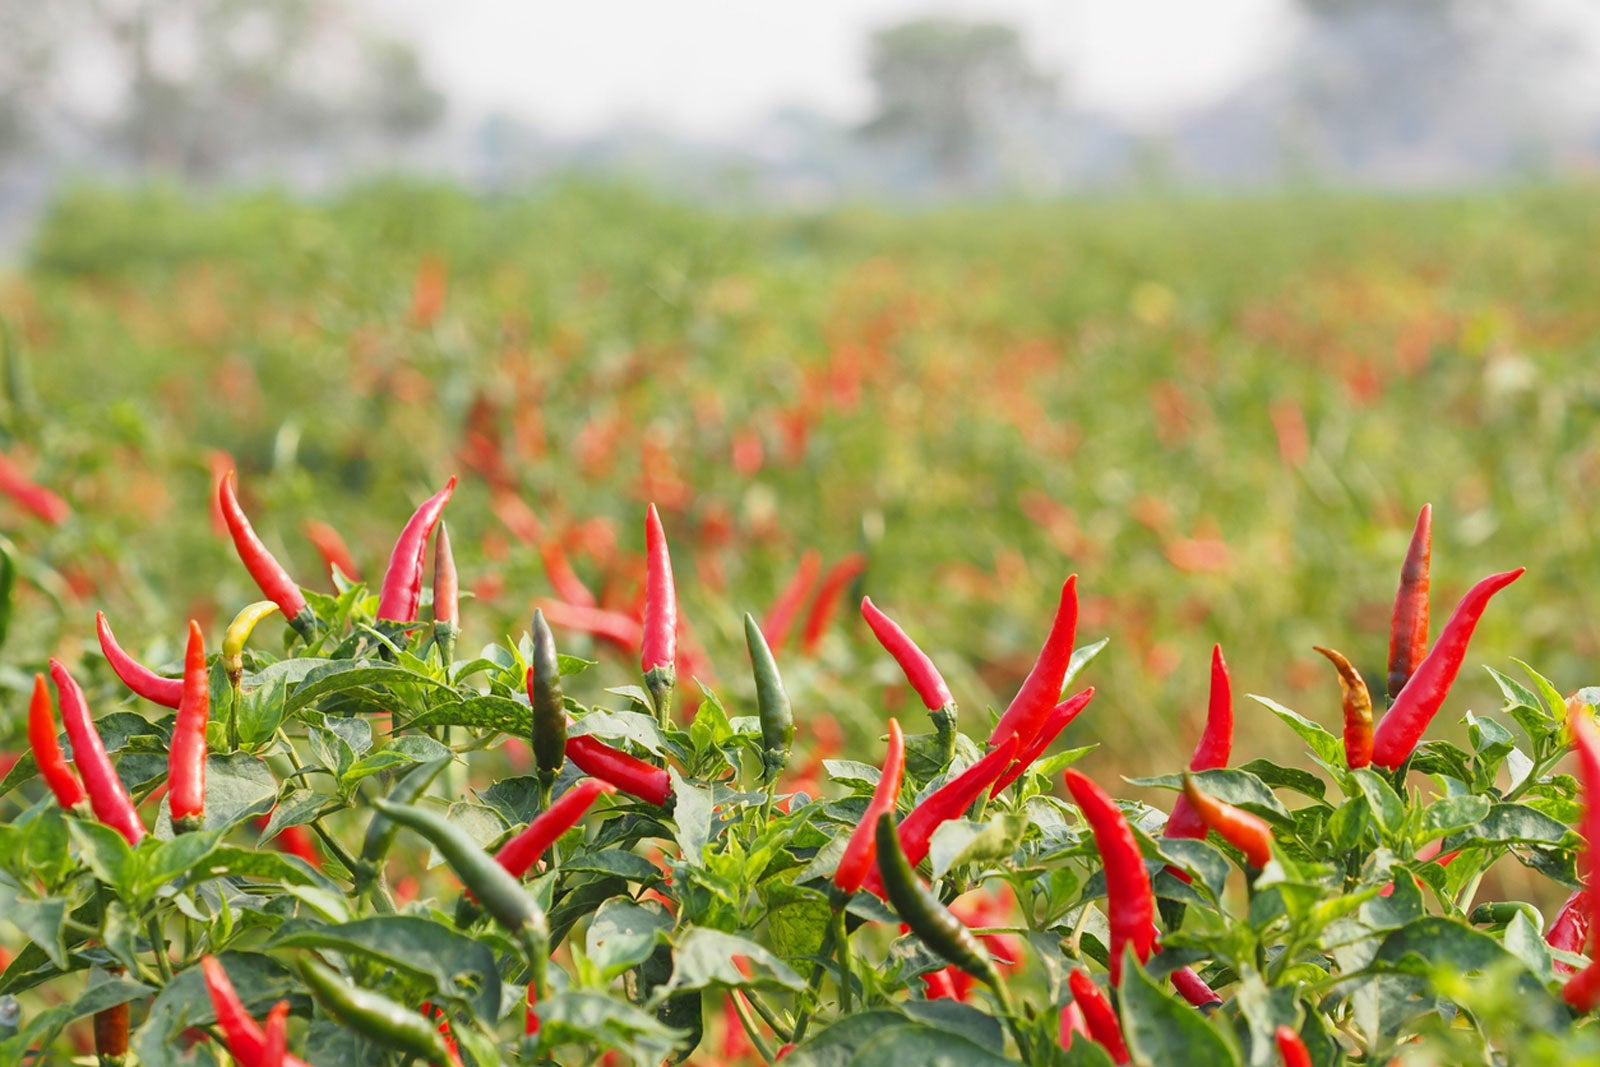 Growing Hot Peppers - How To Grow Chili Peppers At Home.